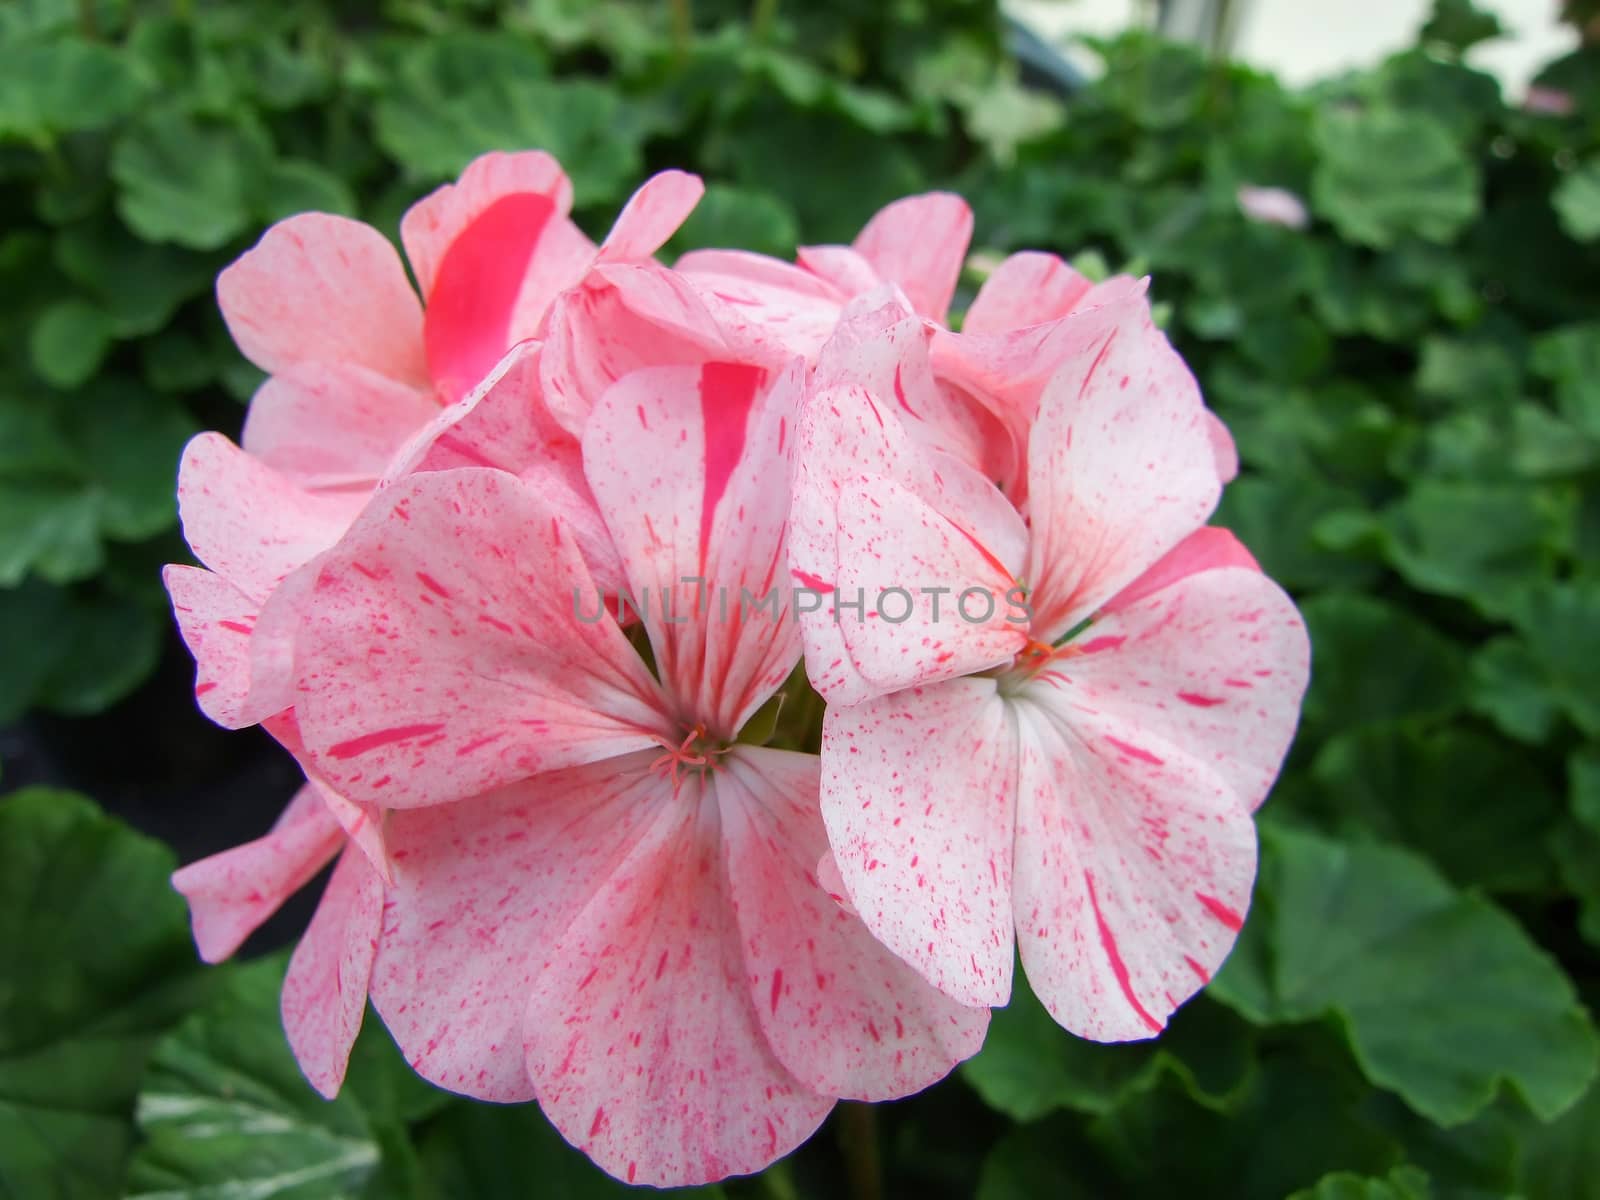 Pelargonium - Geranium Flowers showing their lovely petal Detail in the garden with a green background